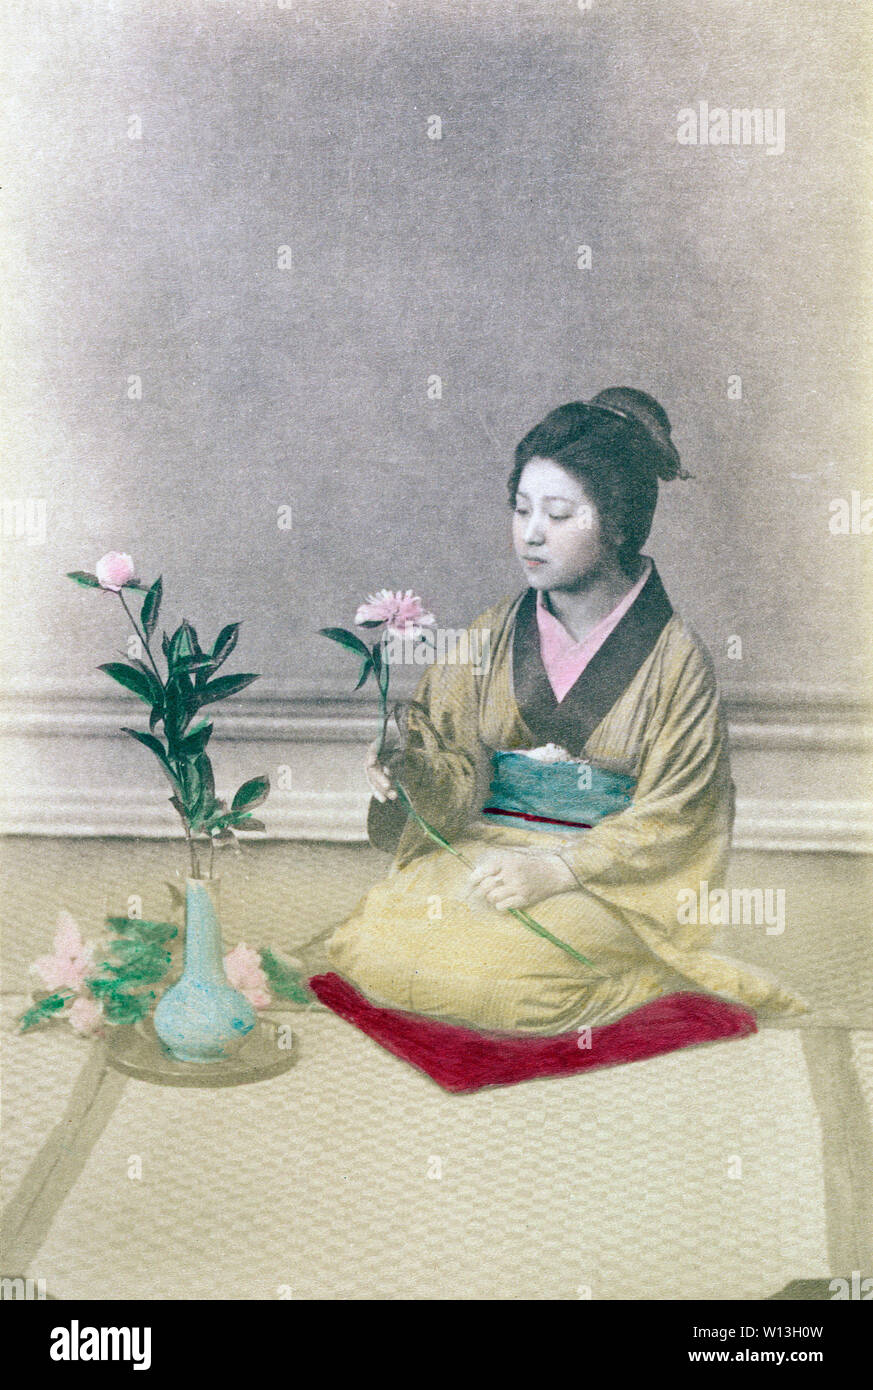 [ 1890s Japan - Ikebana Flower Arrangement ] —   Woman in kimono with traditional hairstyle doing 'ikebana', Japanese style flower arrangement.  During the Meiji and Taisho periods, ikebana and chado (tea ceremony) were a popular way to culturally enlighten oneself, especially for young women on the threshold of marriage.   19th century vintage albumen photograph. Stock Photo